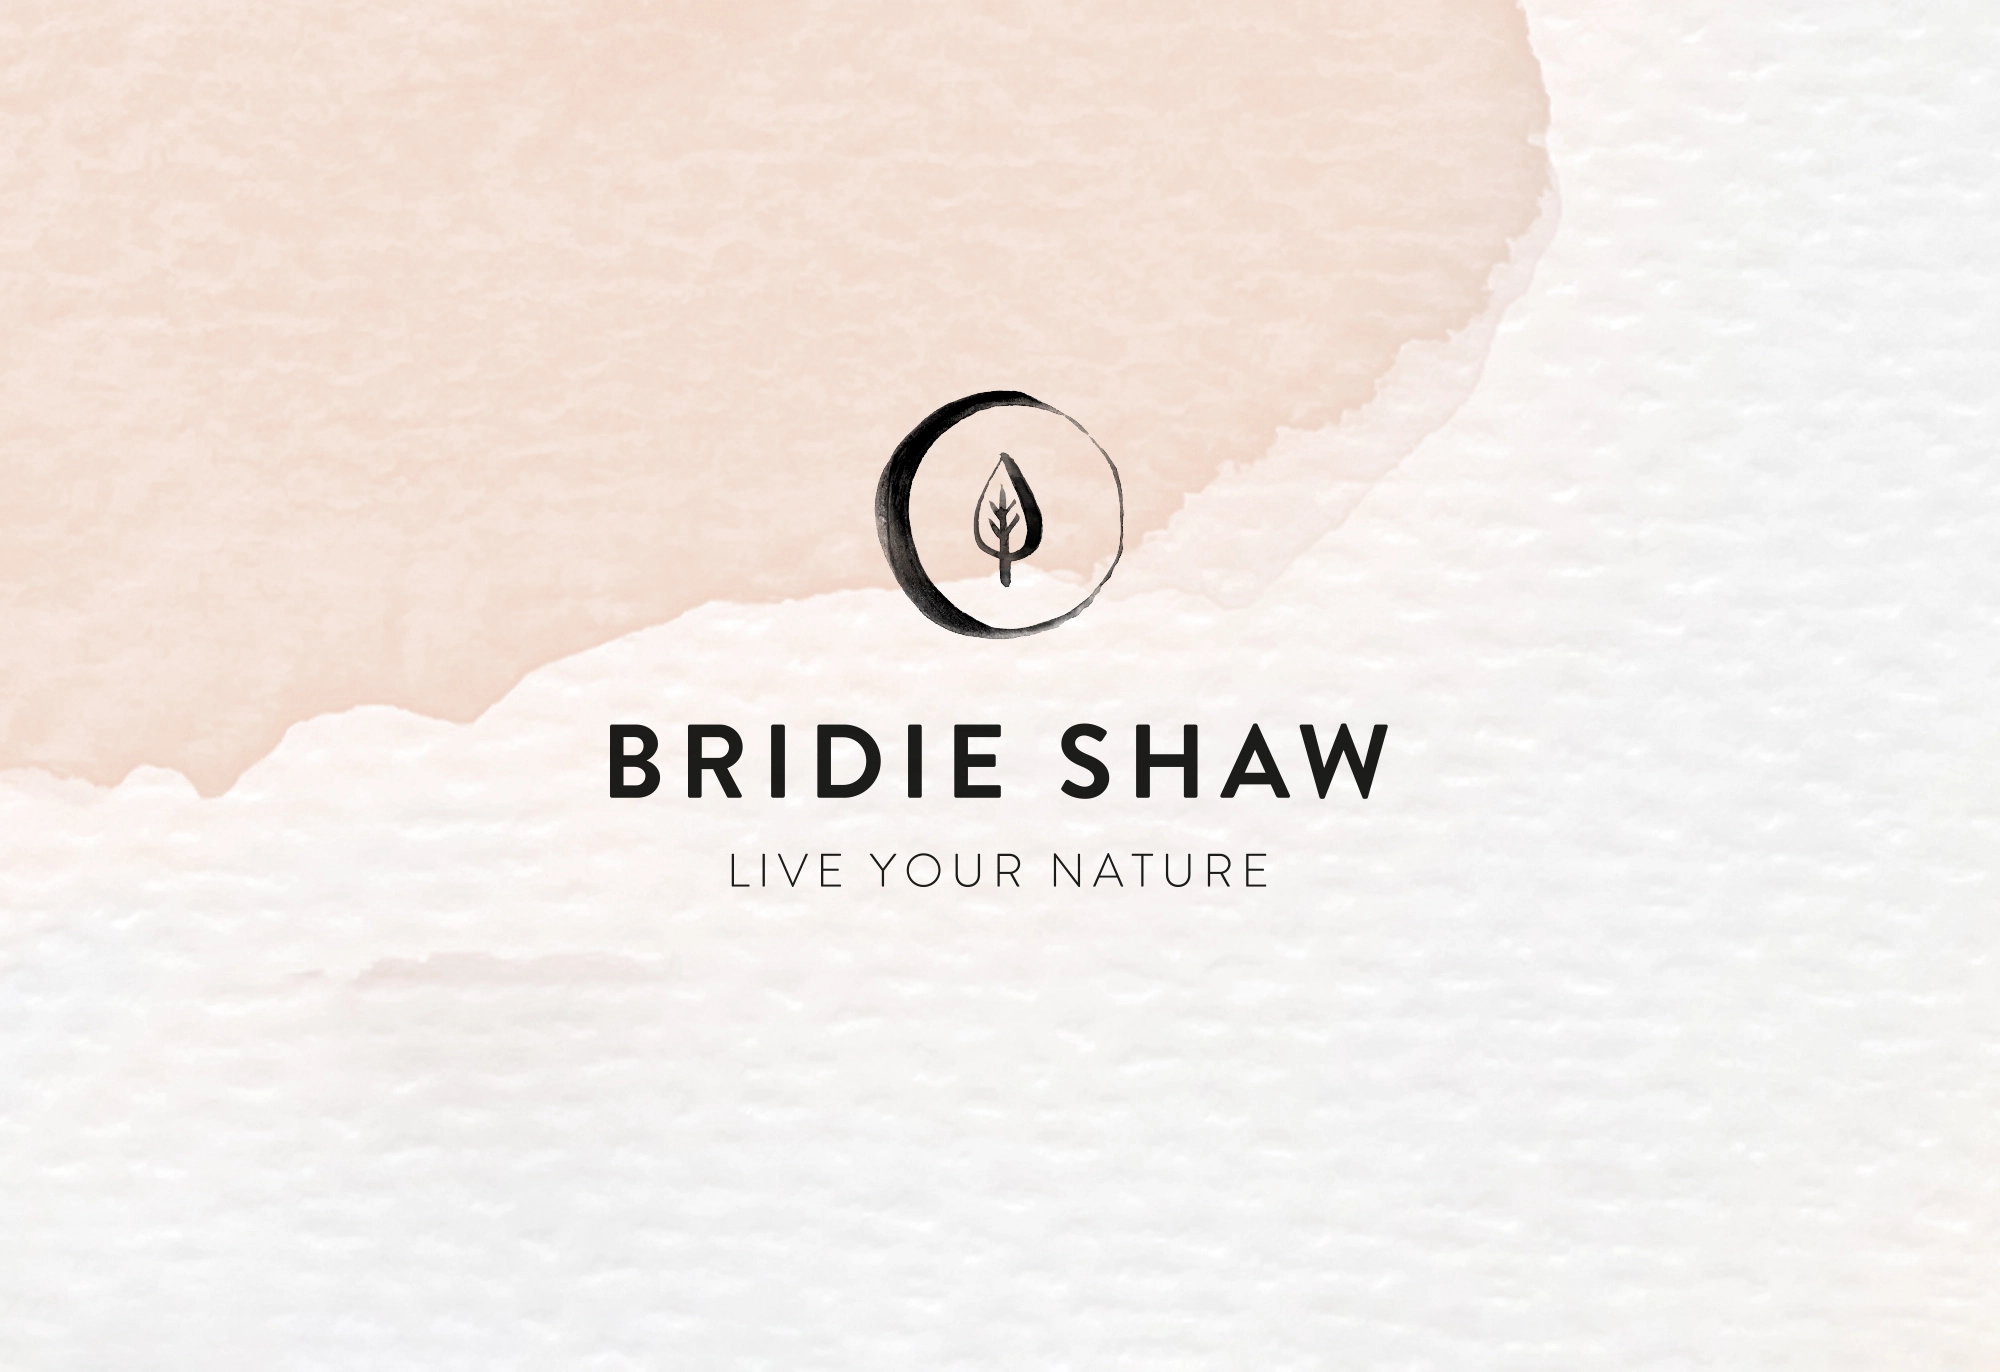 the moon and leaf Bridie Shaw Acupunture logo with the tagline Live Your Nature sits on a pink watercolour background